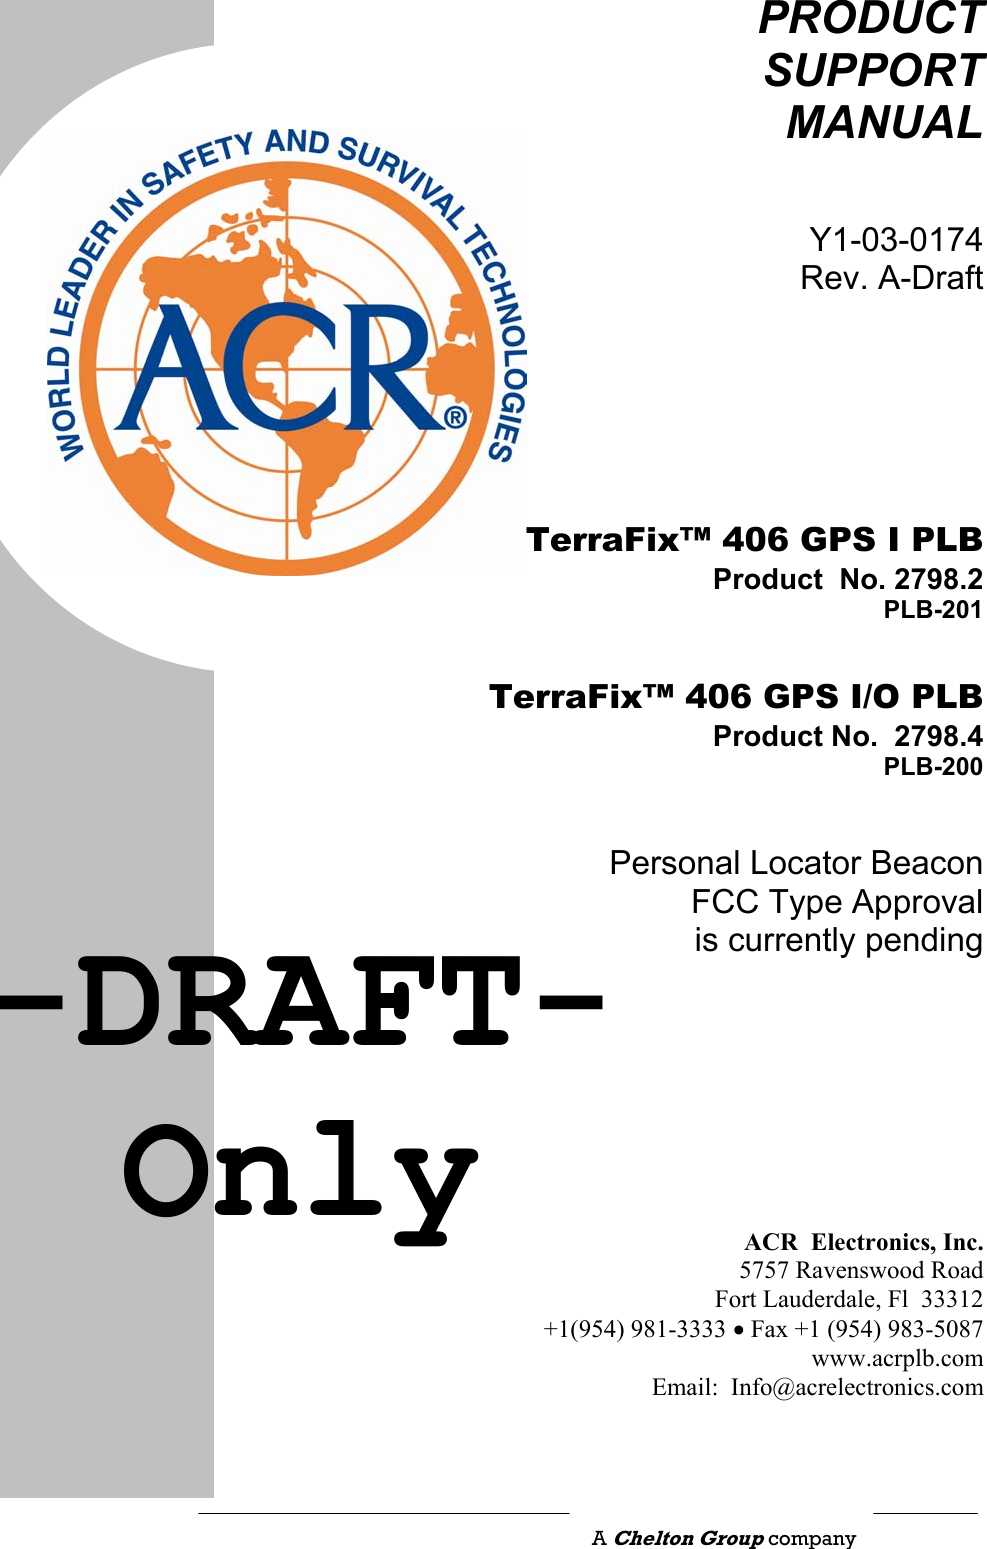                                                    PRODUCT SUPPORT MANUAL Y1-03-0174Rev. A-Draft   TerraFix™ 406 GPS I PLB Product  No. 2798.2 PLB-201  TerraFix™ 406 GPS I/O PLB Product No.  2798.4PLB-200Personal Locator BeaconFCC Type Approval is currently pending        ACR  Electronics, Inc.5757 Ravenswood RoadFort Lauderdale, Fl  33312+1(954) 981-3333 • Fax +1 (954) 983-5087www.acrplb.comEmail:  Info@acrelectronics.com A Chelton Group company -DRAFT-Only 